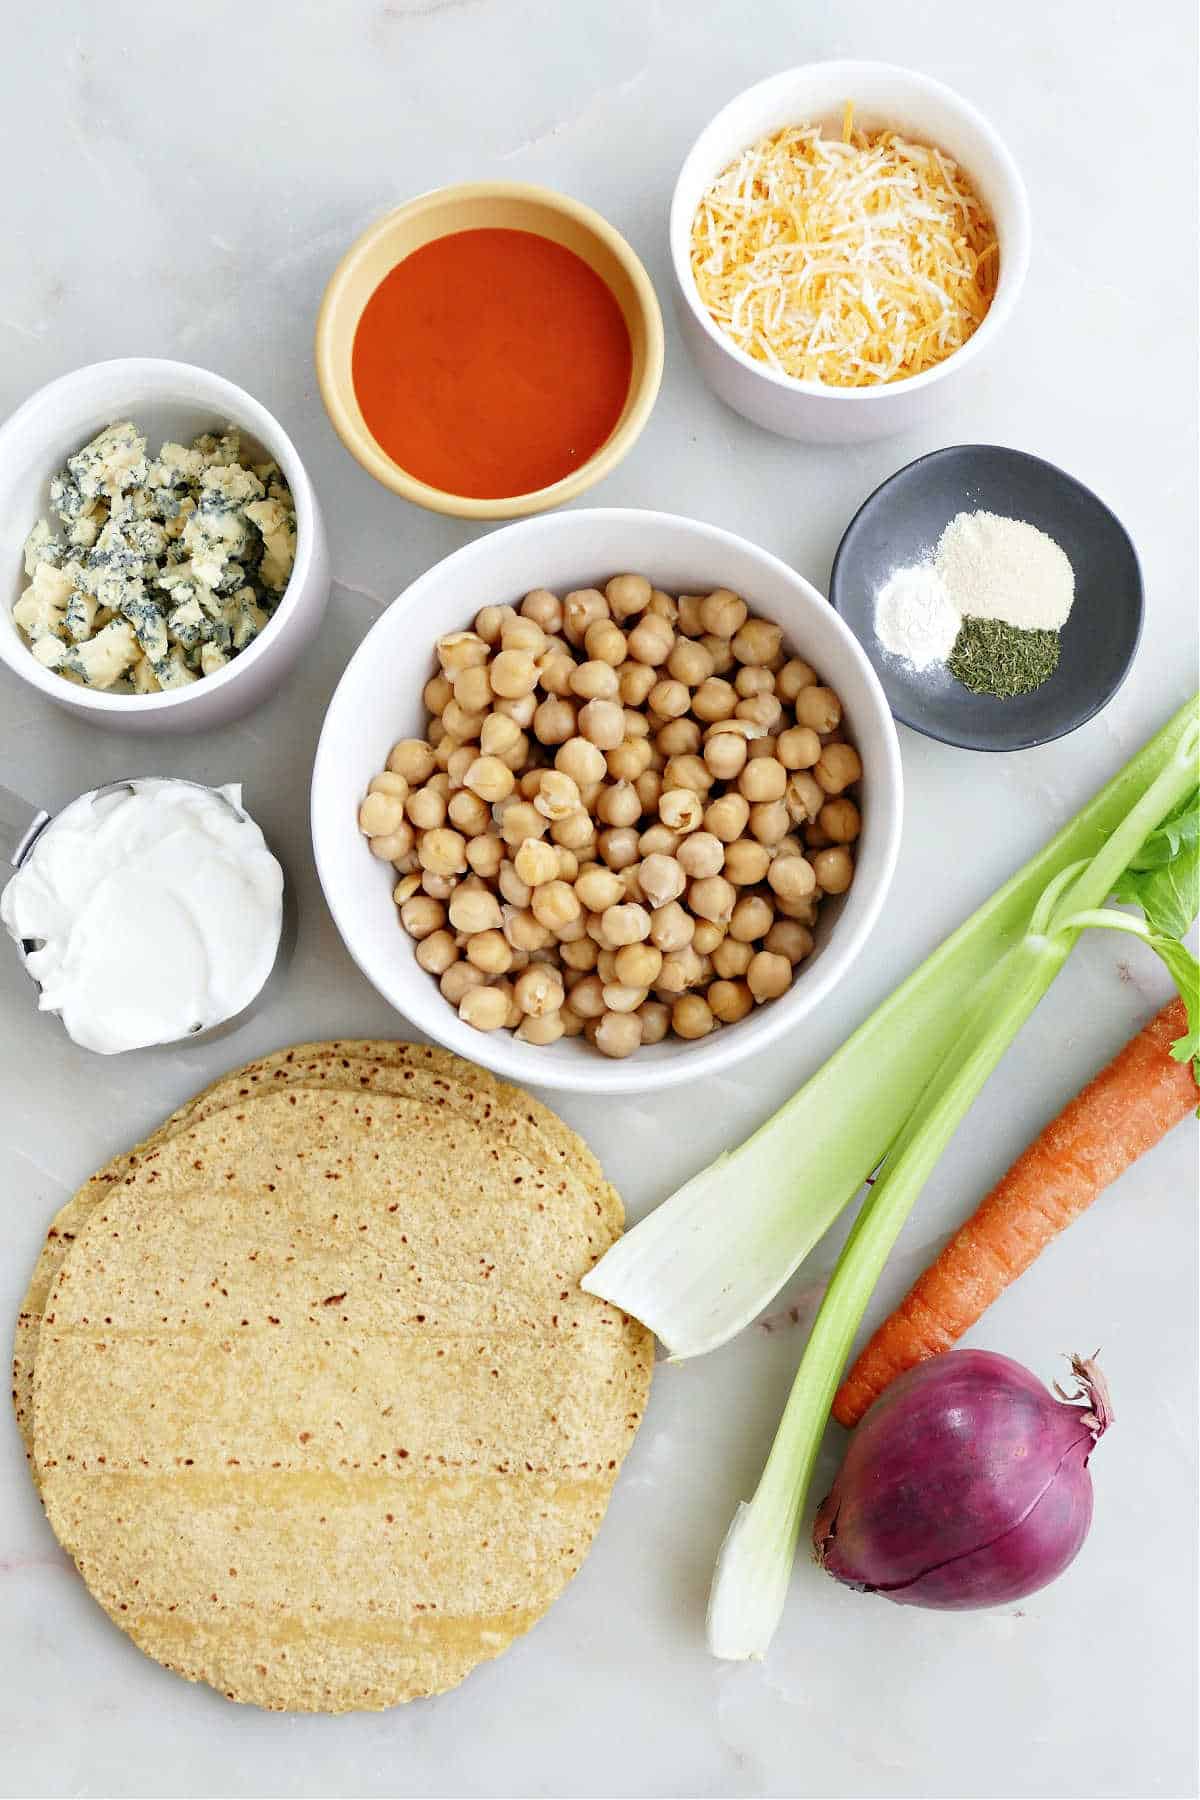 Ingredients needed to make buffalo chickpea tacos.